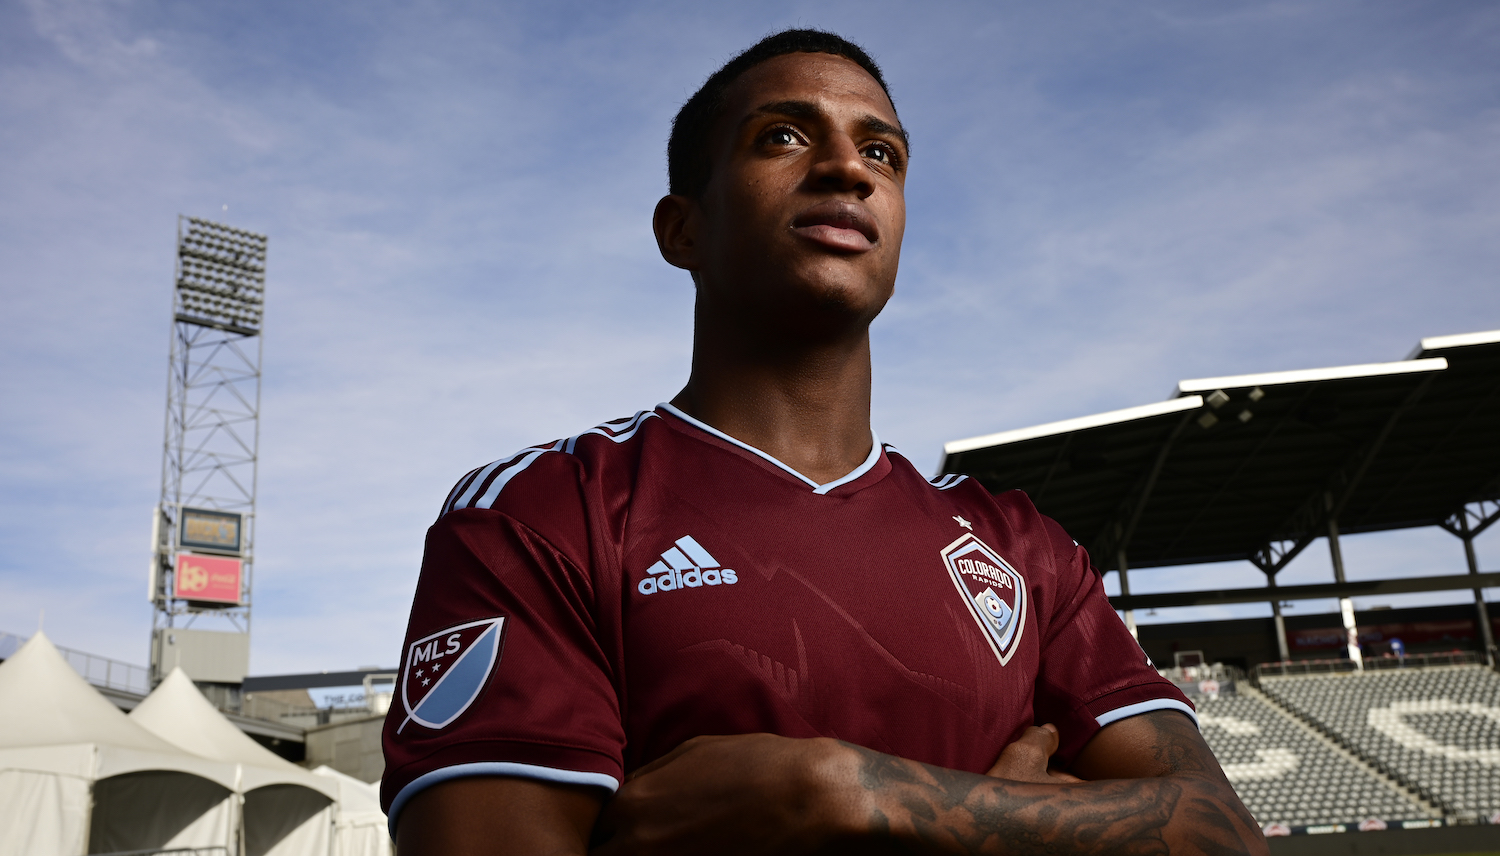 COMMERCE CITY, CO - MARCH 3 : Max Alves of Colorado Rapids poses for a portrait at Dicks Sporting Goods Park in Commerce City, Colorado on Thursday, March 3, 2022.(Photo by Hyoung Chang/MediaNews Group/The Denver Post via Getty Images)